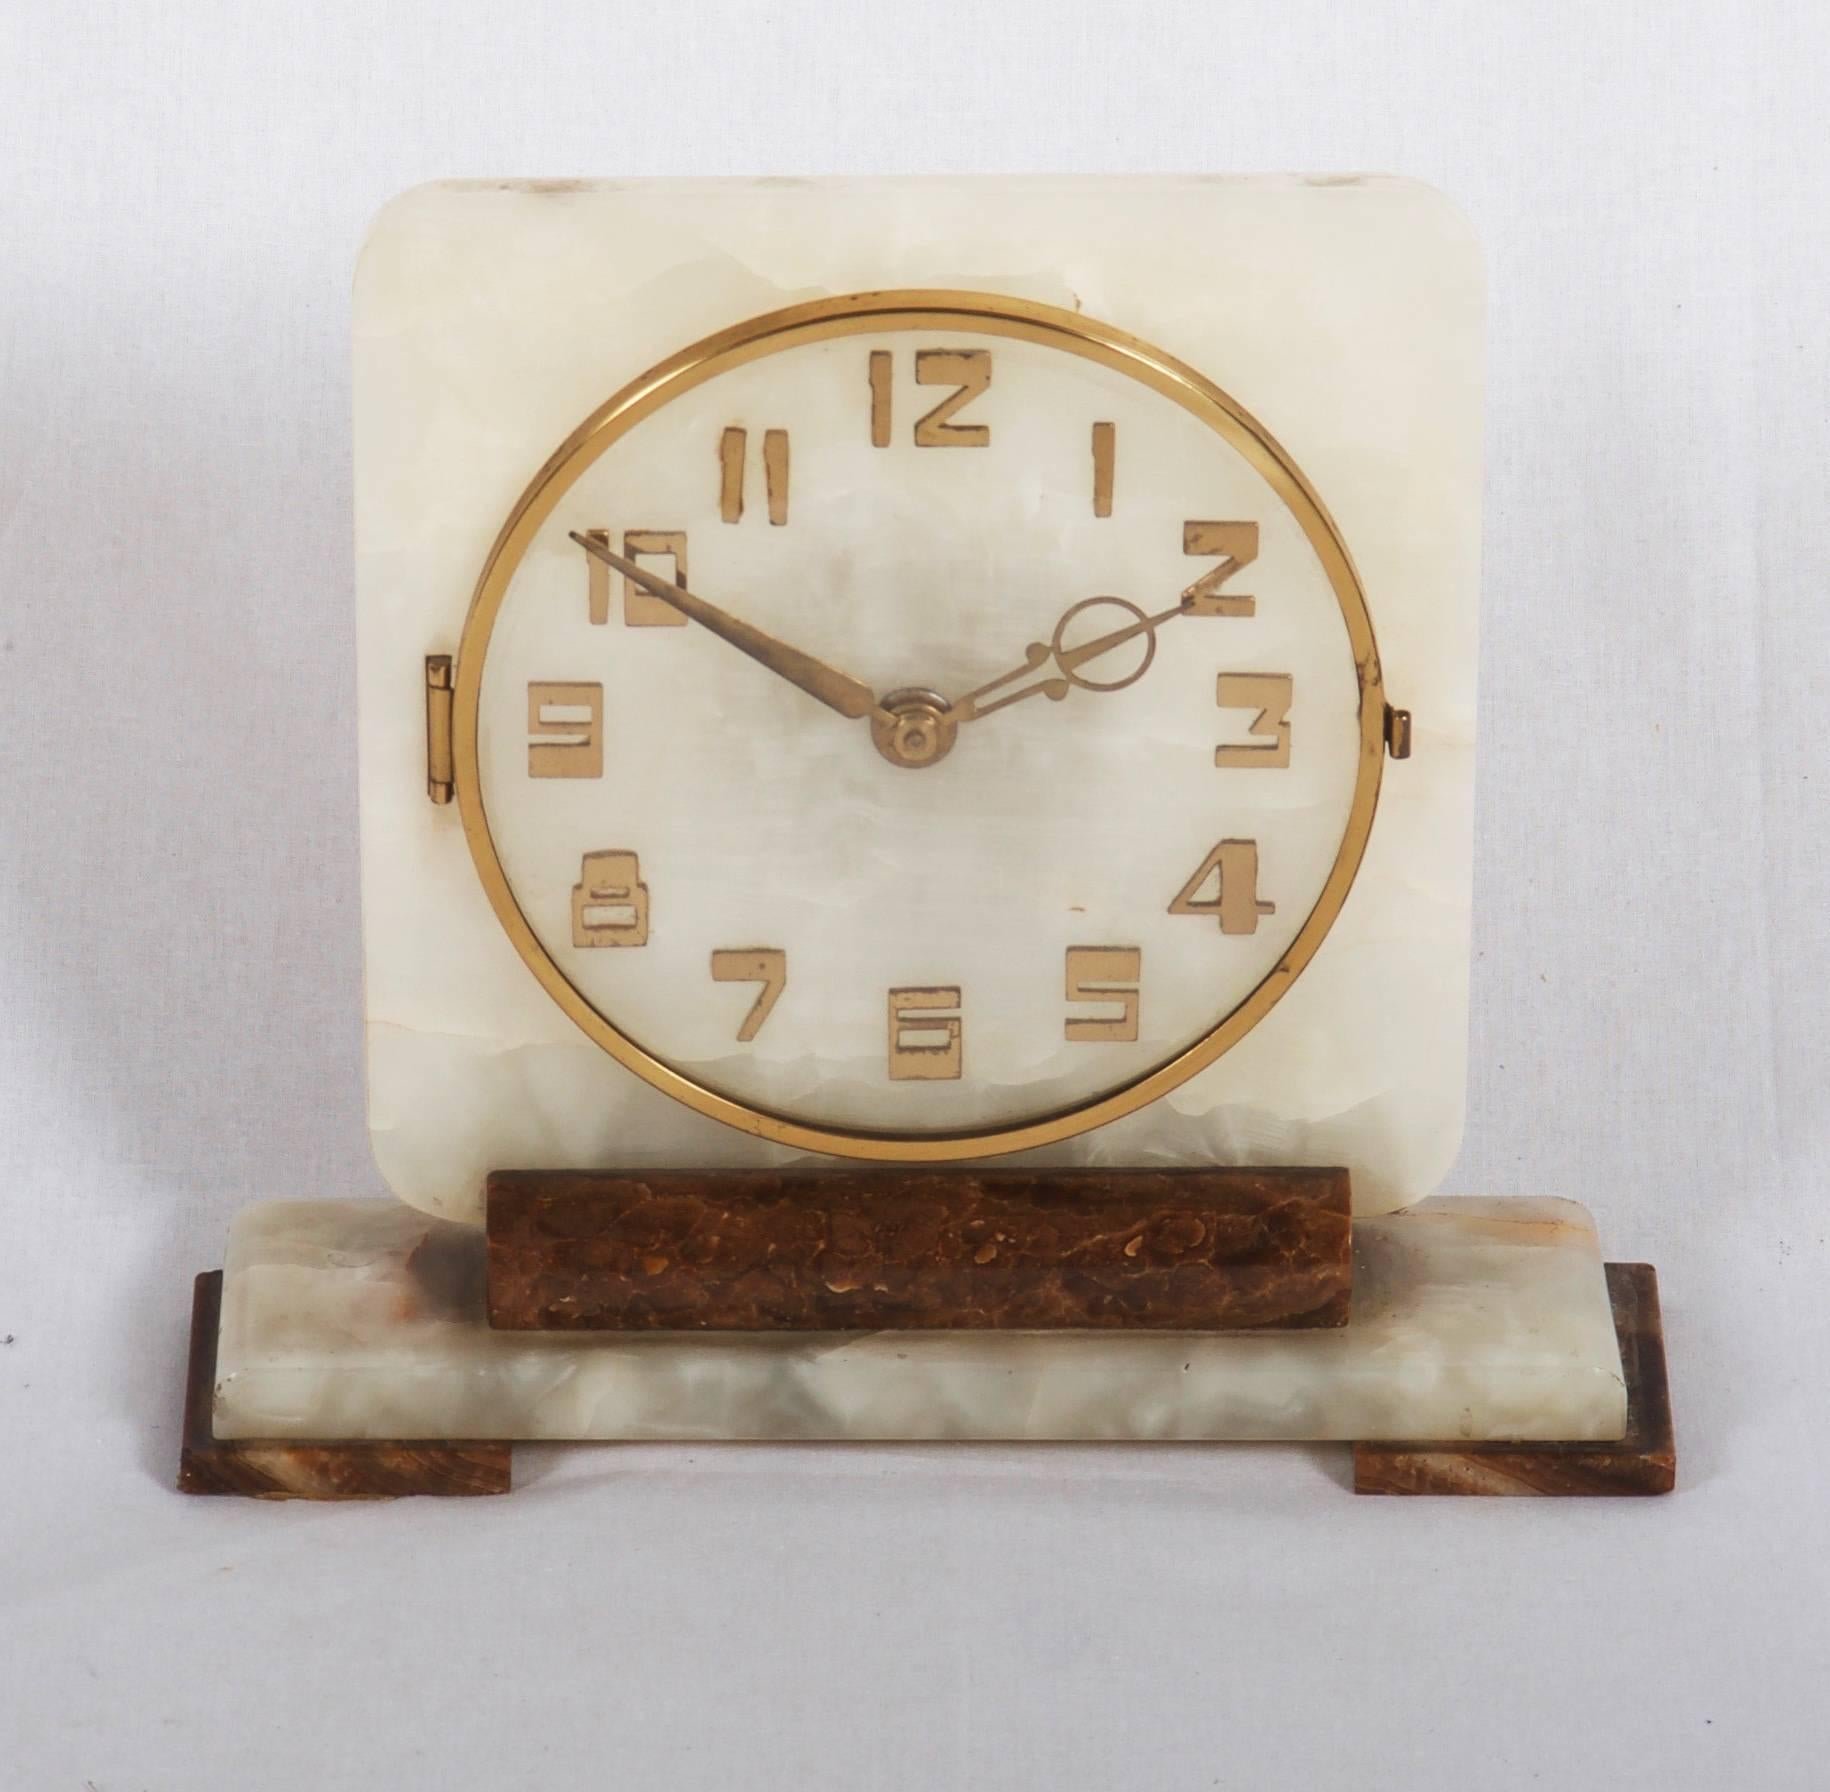 Alabaster with brass movement, digits and pointer, made in Germany in the 1930.